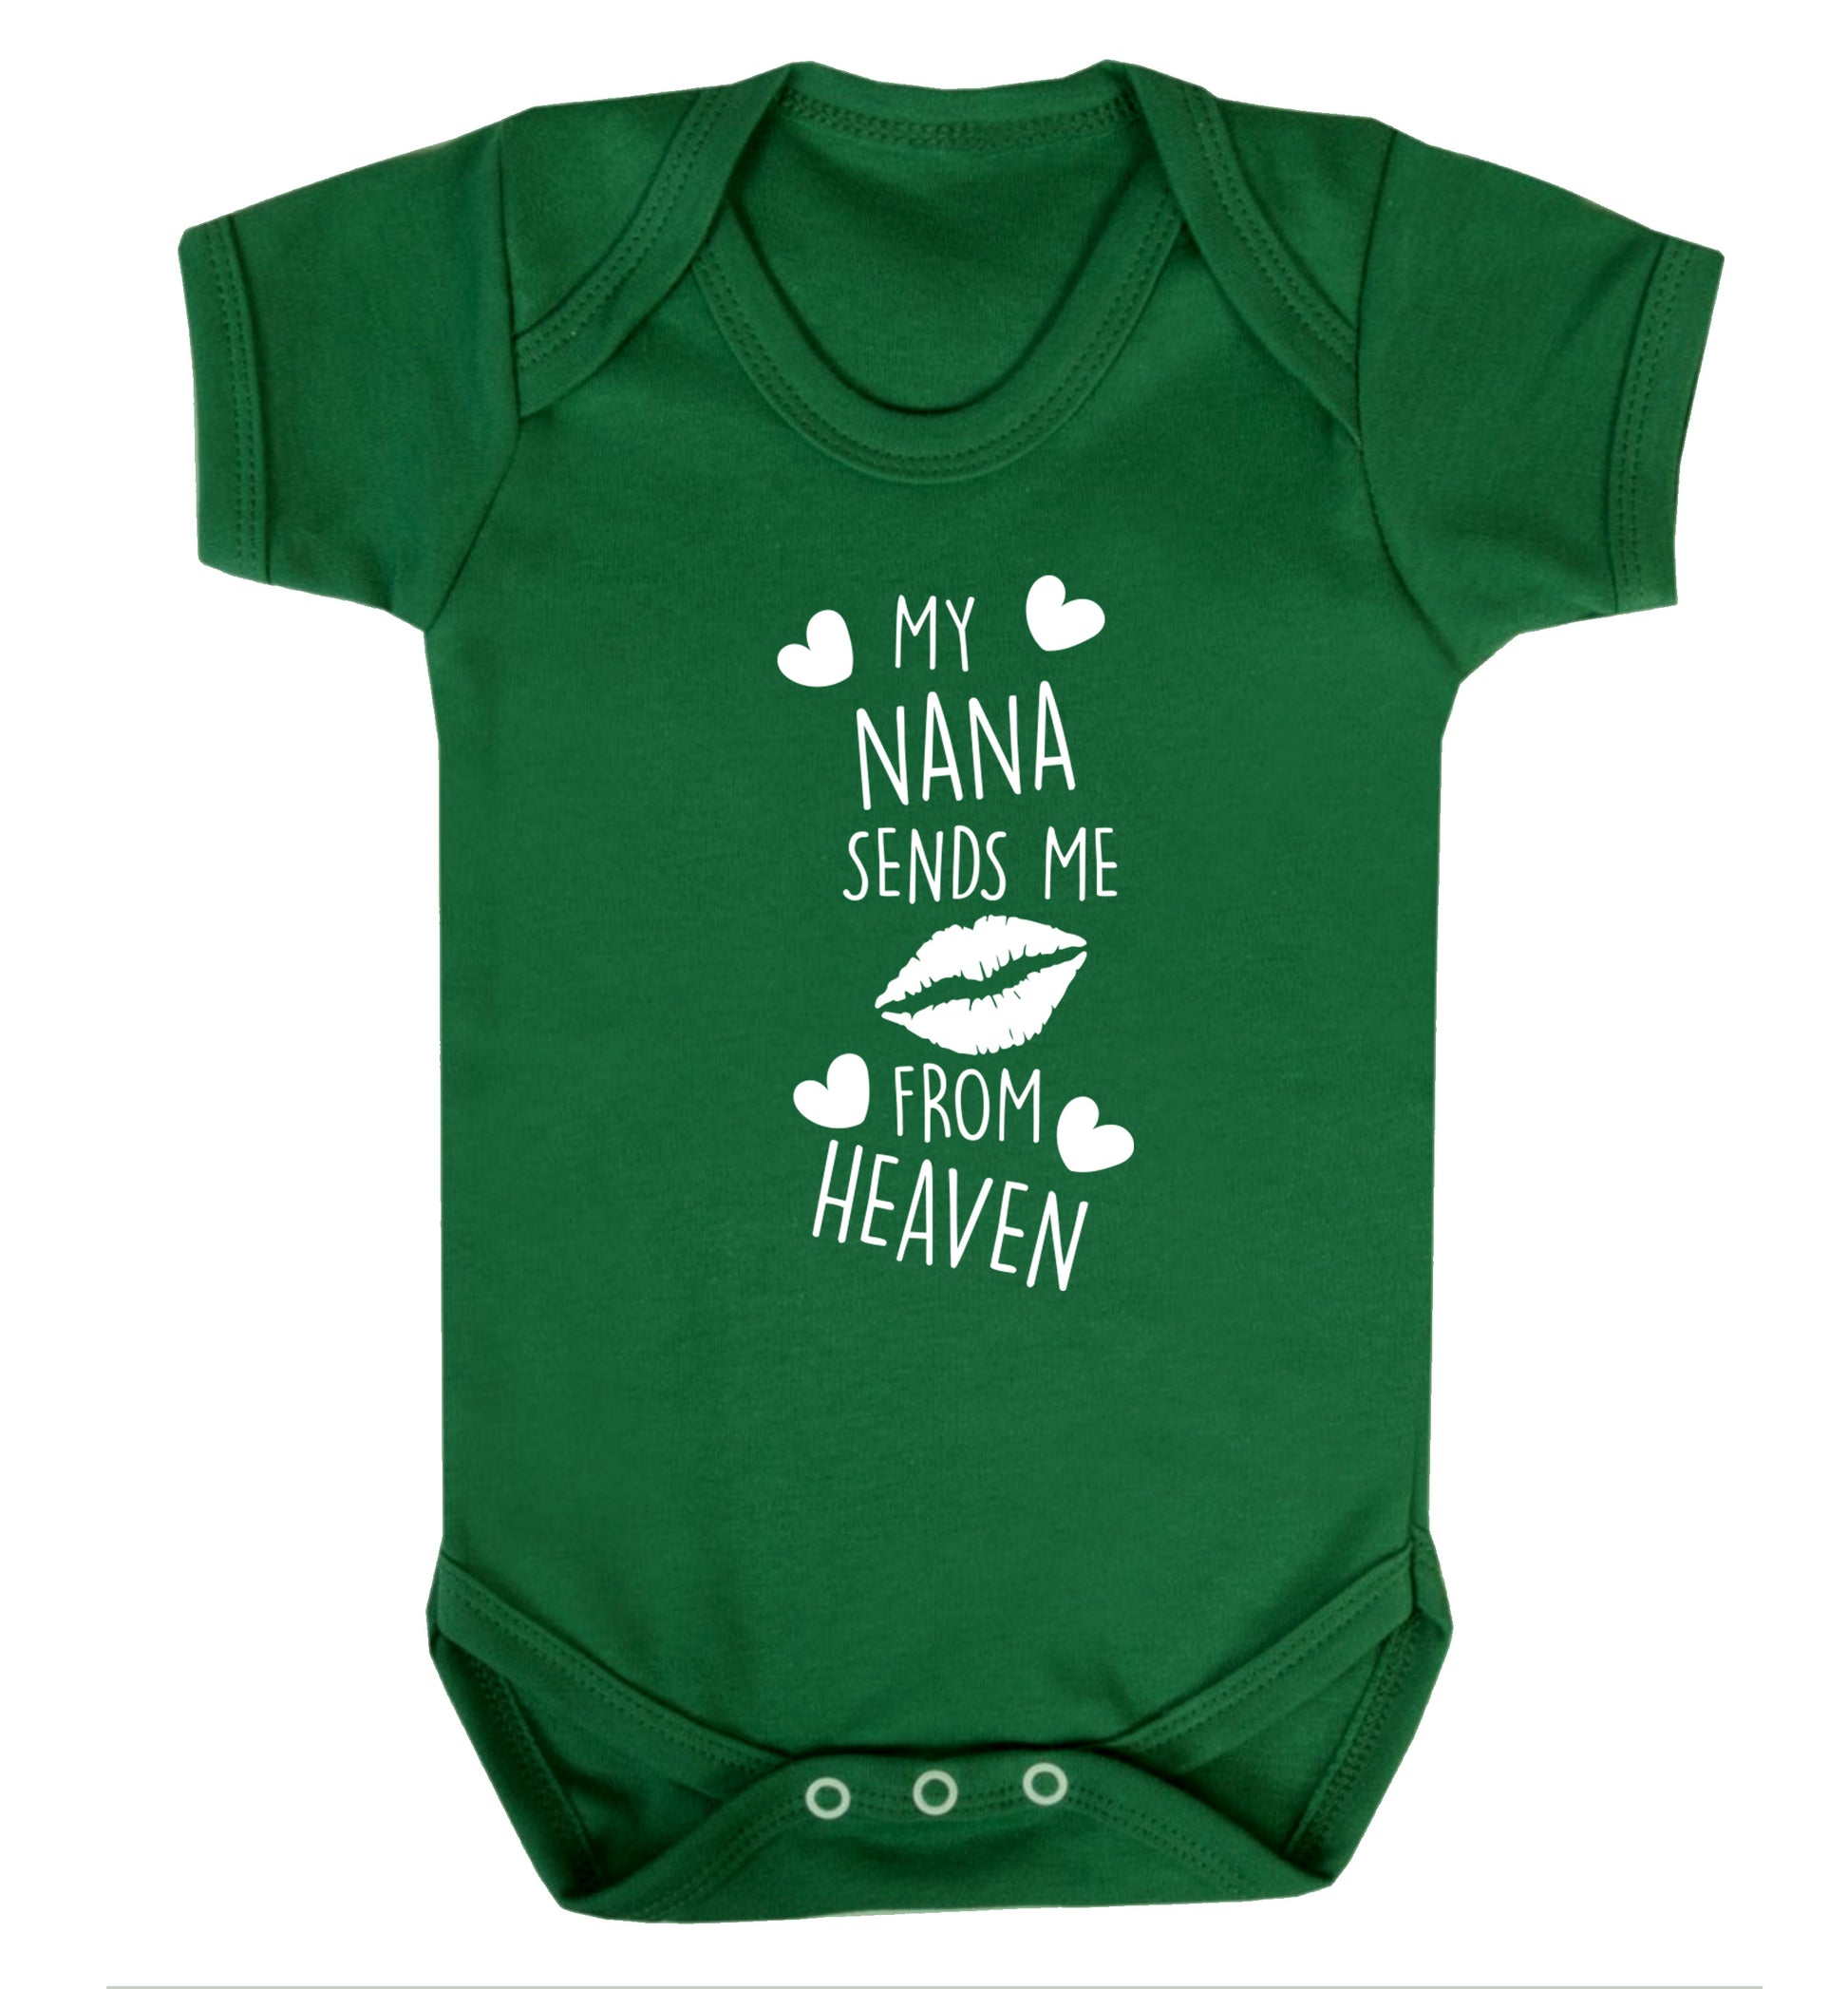 My nana sends me kisses from heaven Baby Vest green 18-24 months